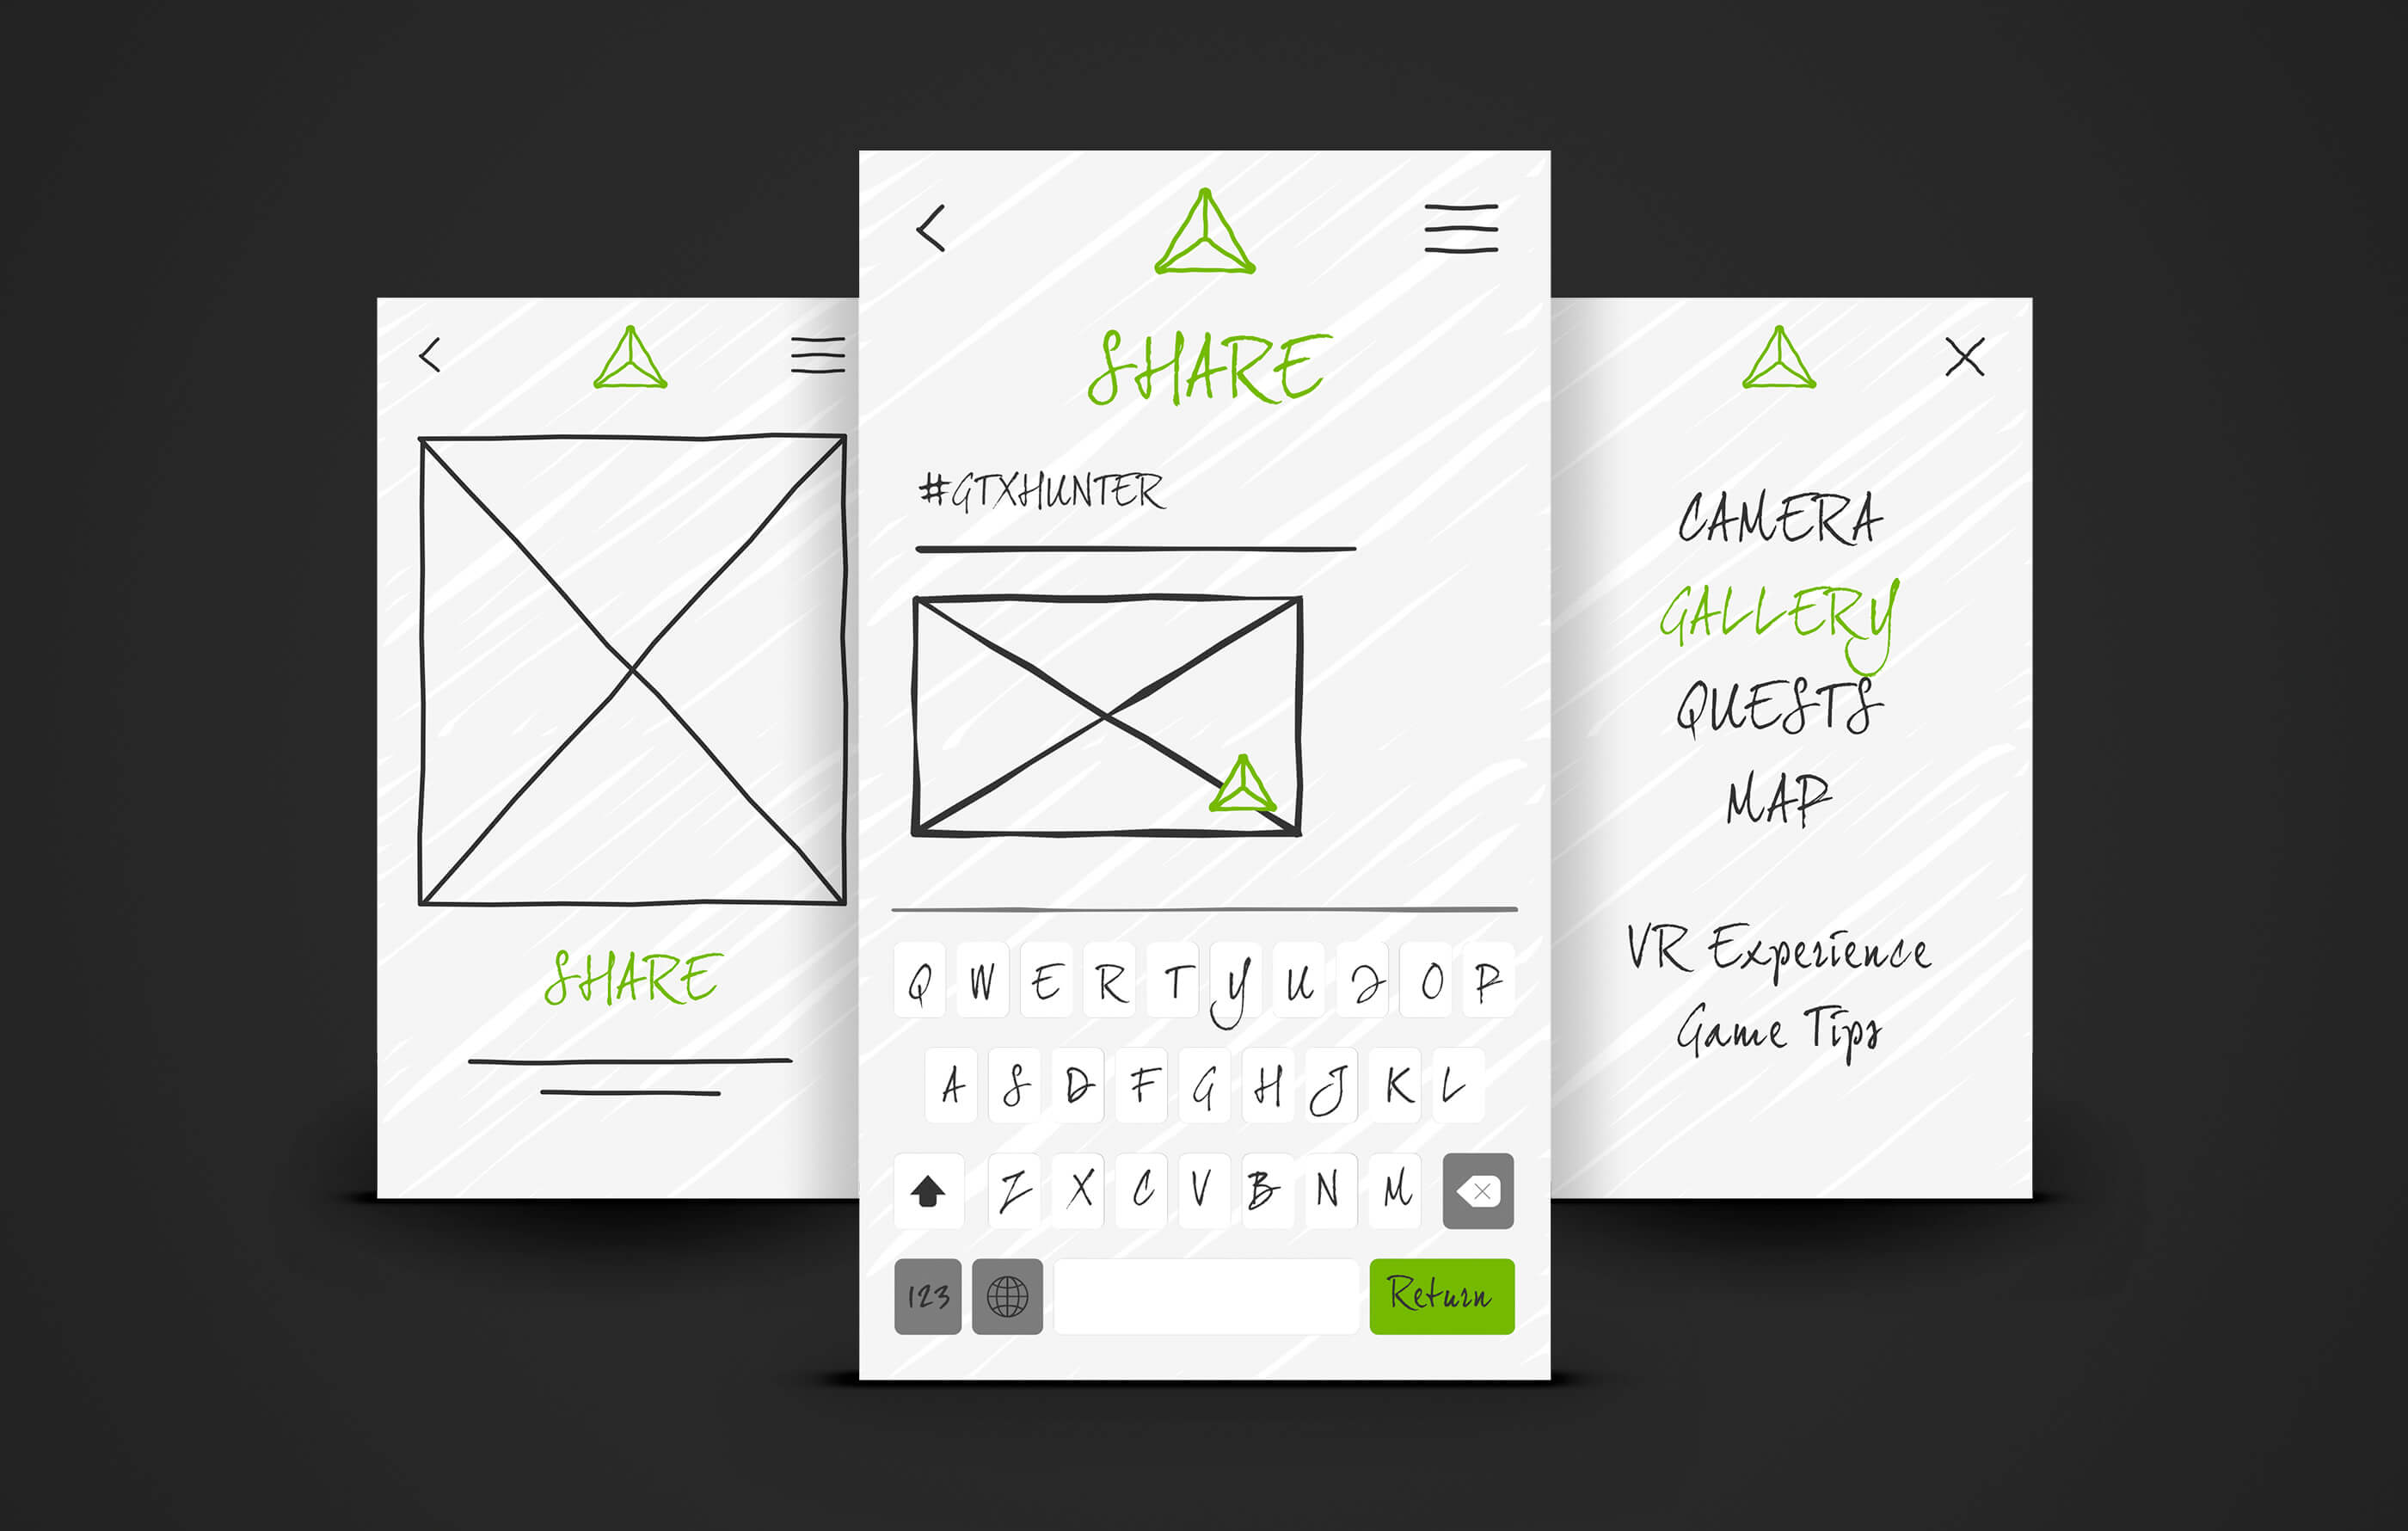 Mobile UX wireframes, exploring the 'snap and share' user journey within the app